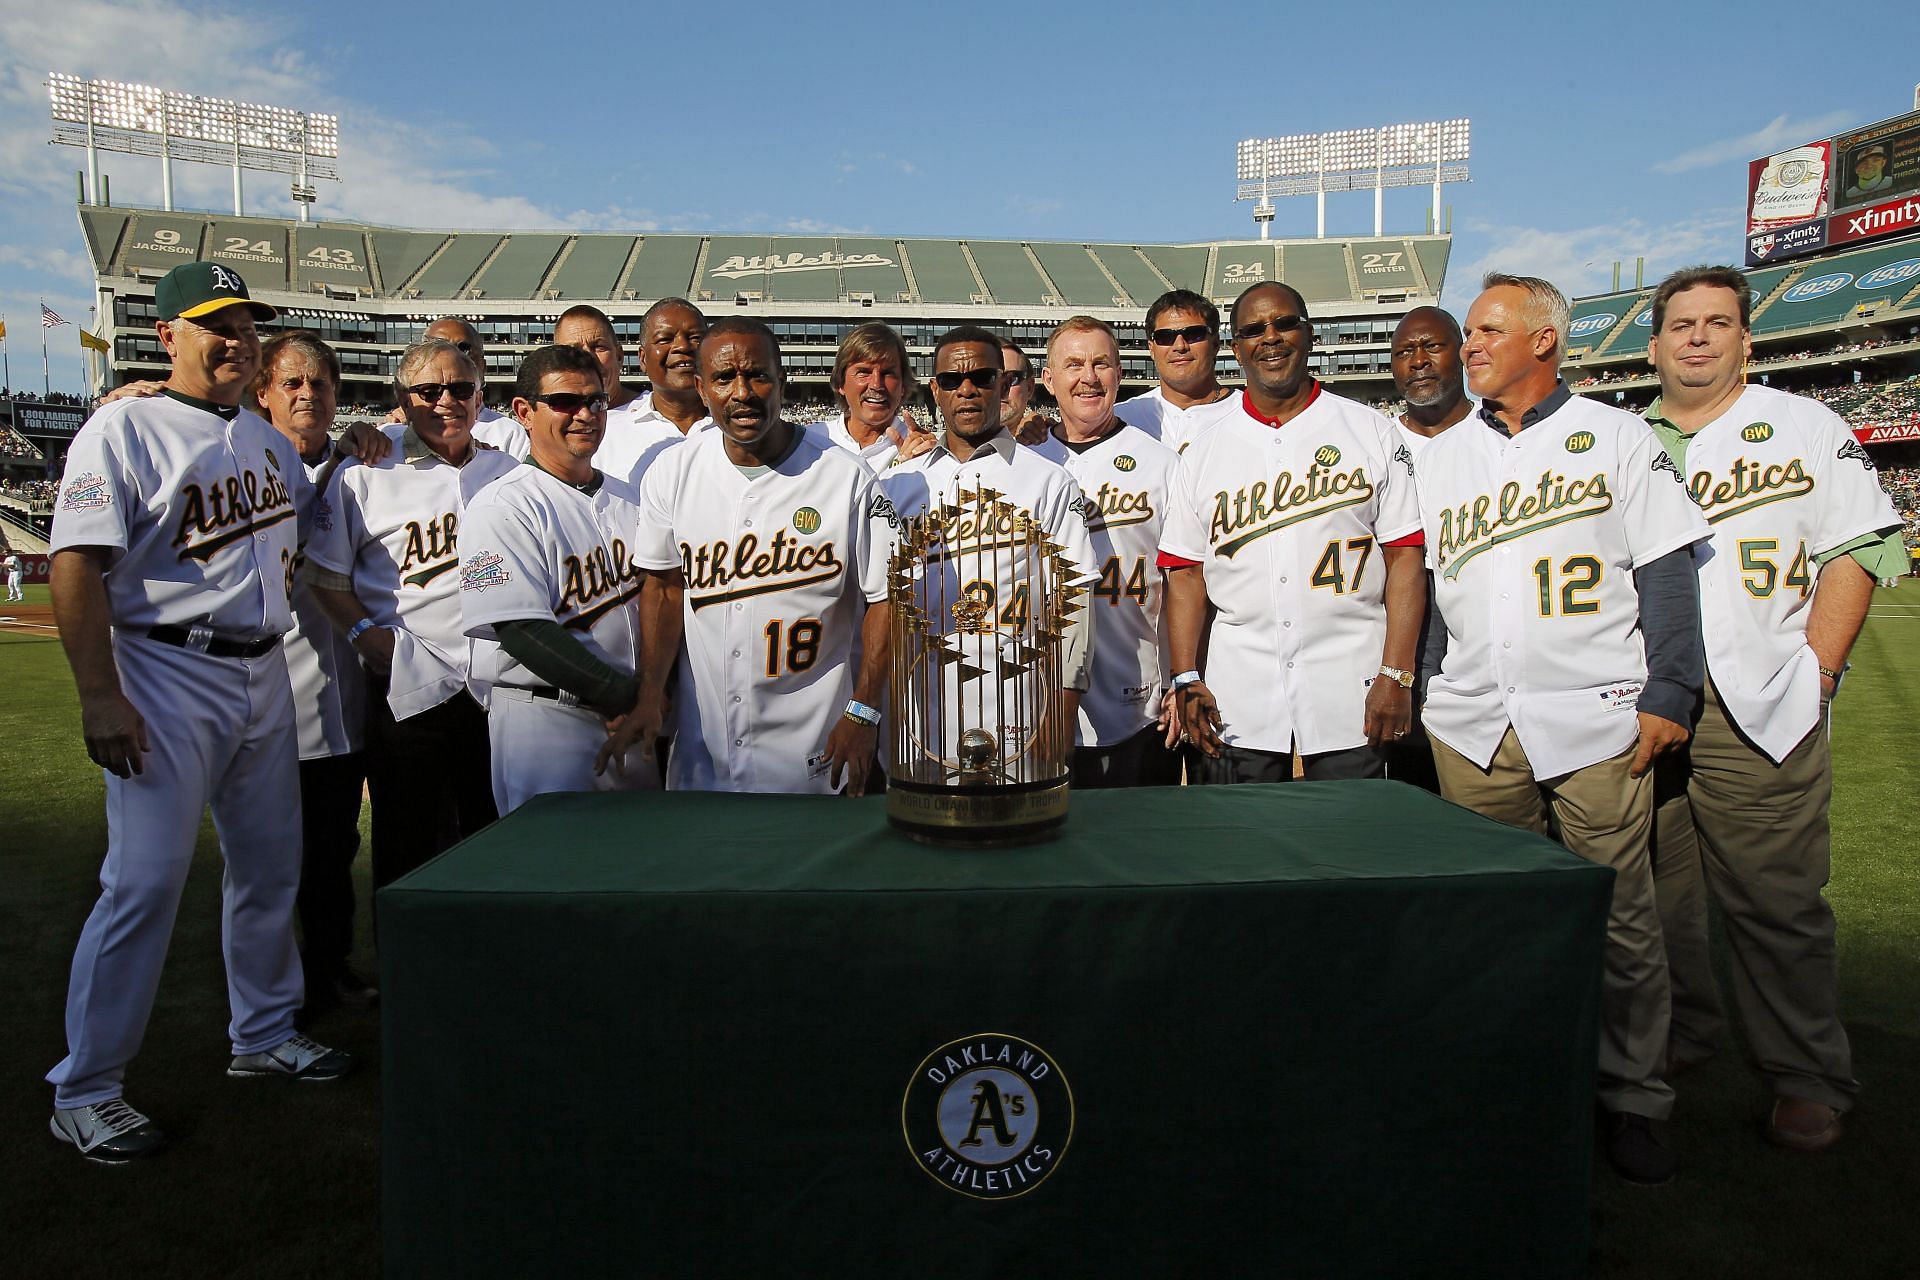 OAKLAND, CA - JULY 19: Members of the 1989 Oakland Athletics celebrate their World Series championship 25 years ago before a game against the Baltimore Orioles at O.co Coliseum on July 19, 2014, in Oakland, California. (Photo by Brian Bahr/Getty Images)